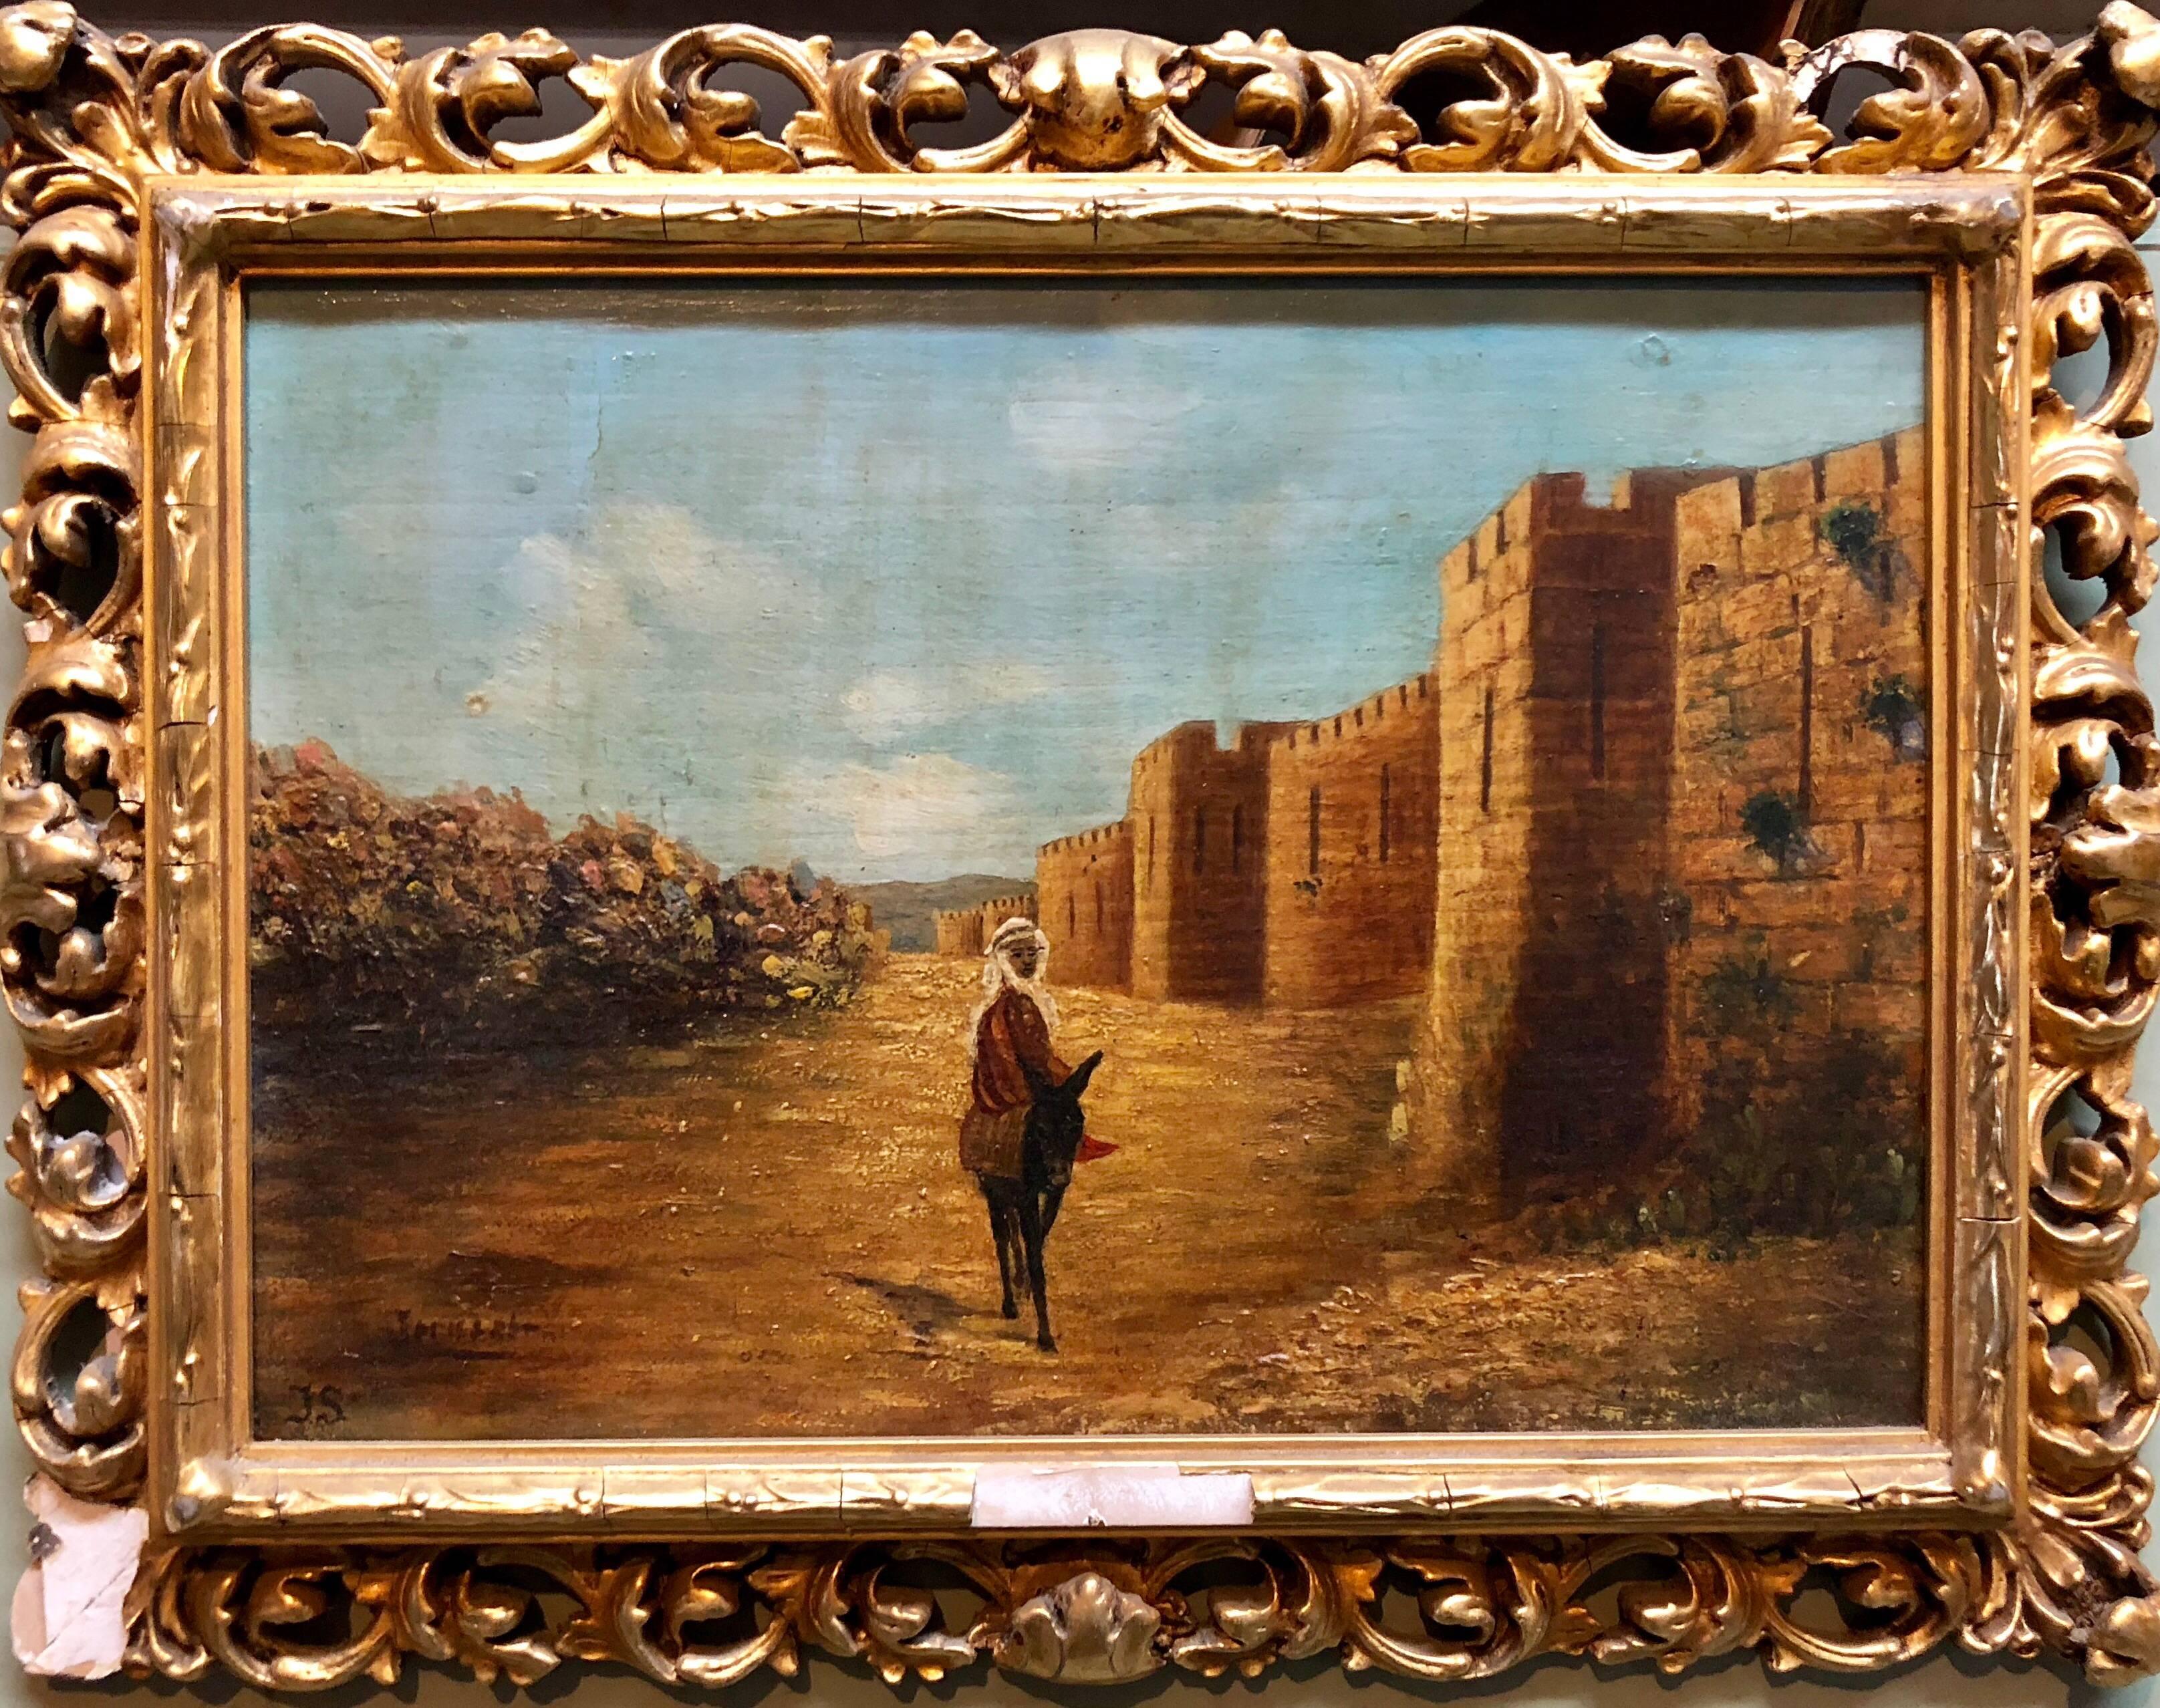 Antique Oil Painting Of Jerusalem Ascent to Old City Walls